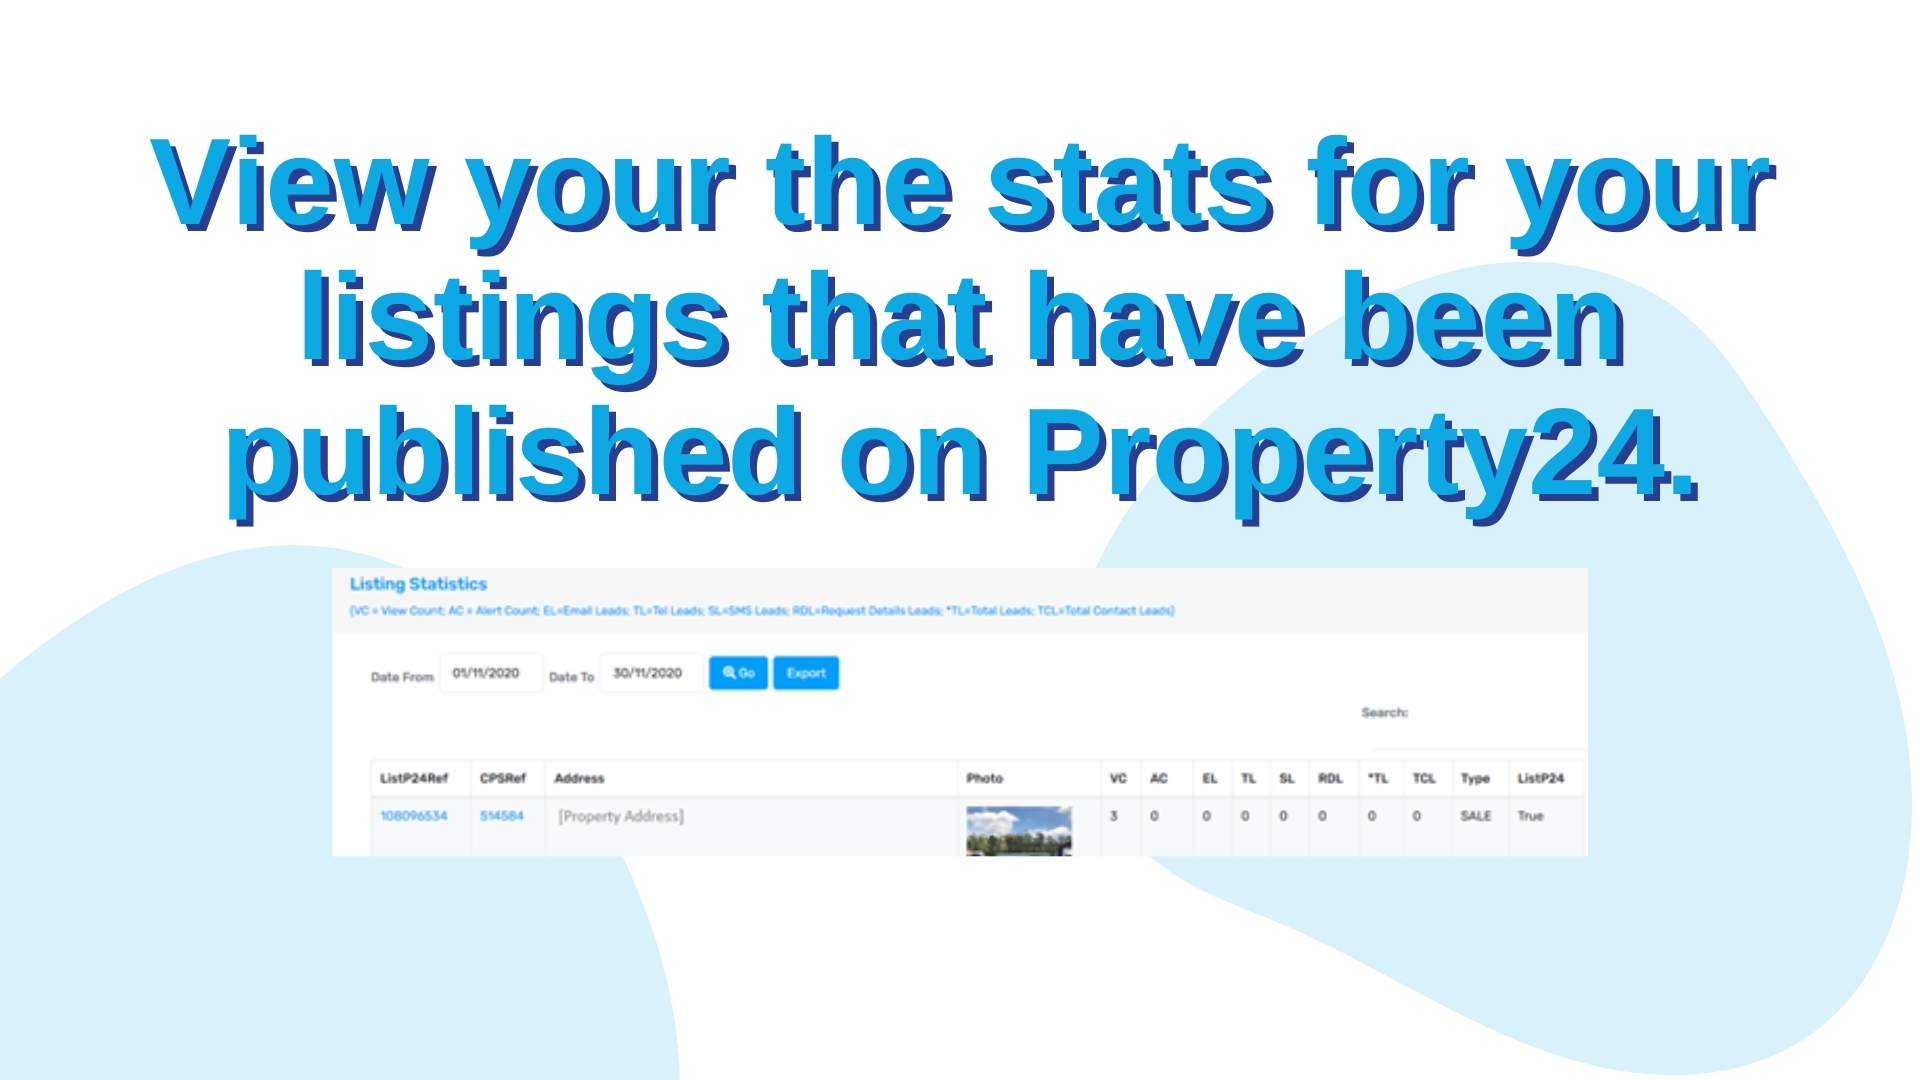 View the Propety24 listing stats for your listings.